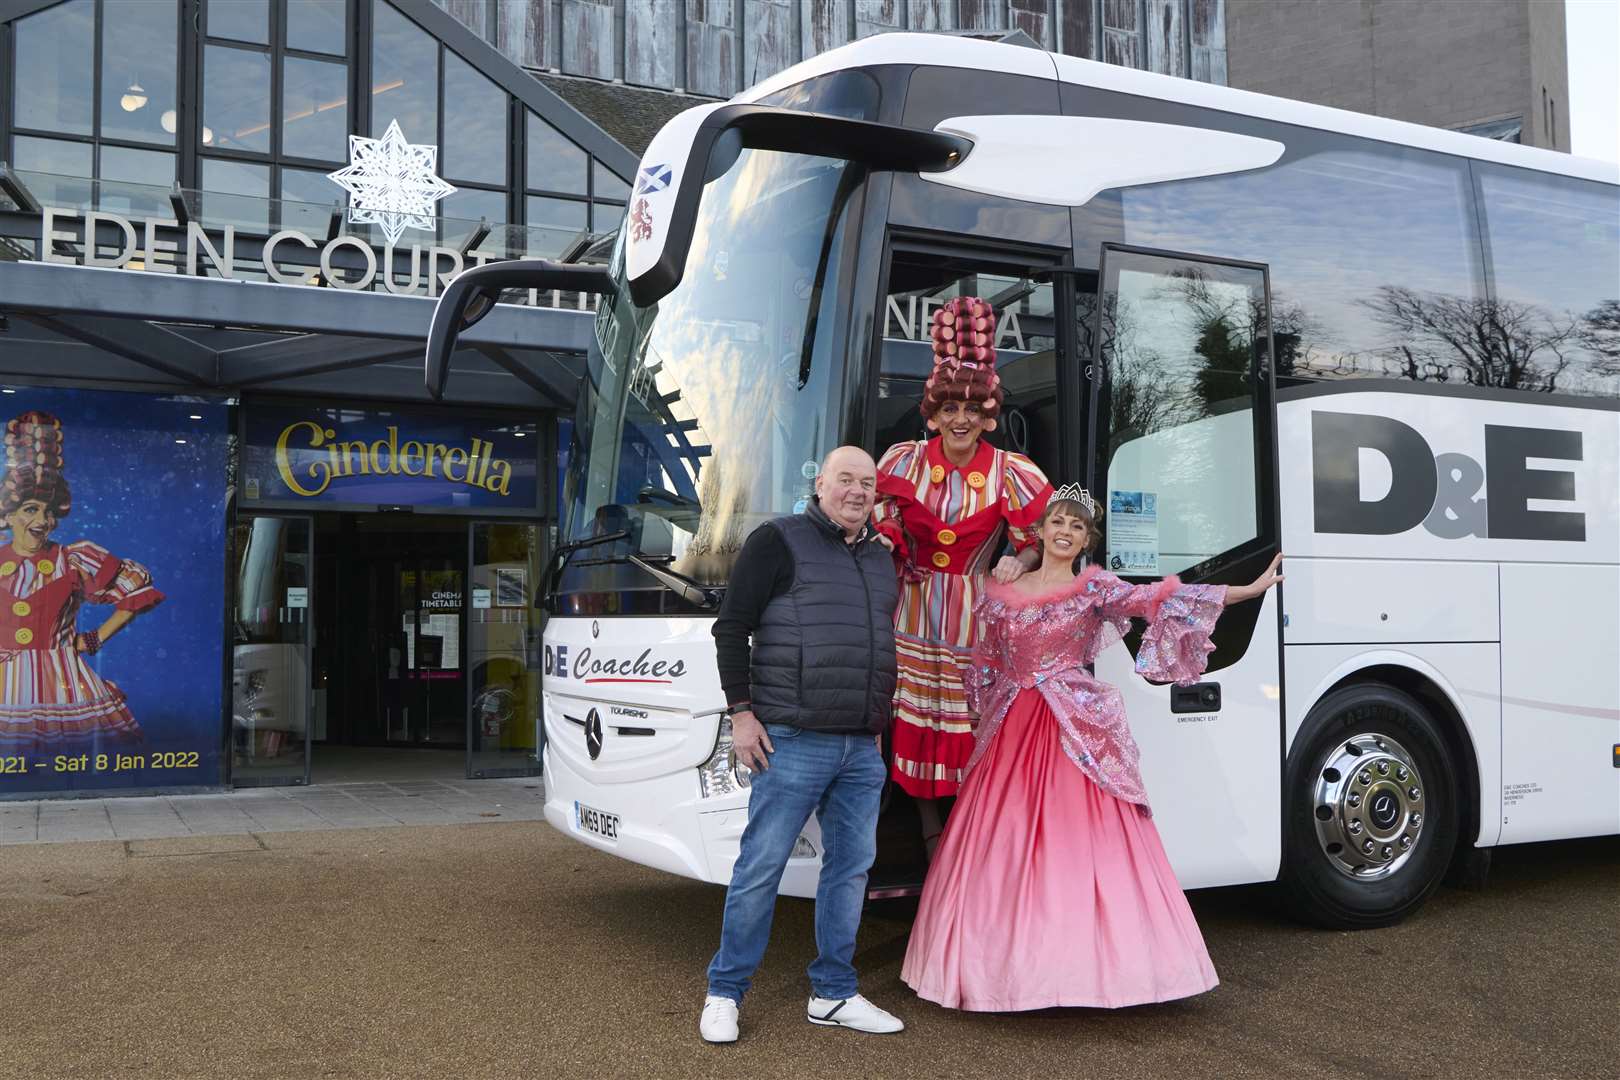 D&E Coaches boss Donald Mathieson with panto stars Steven Wren and Claire Darcy.